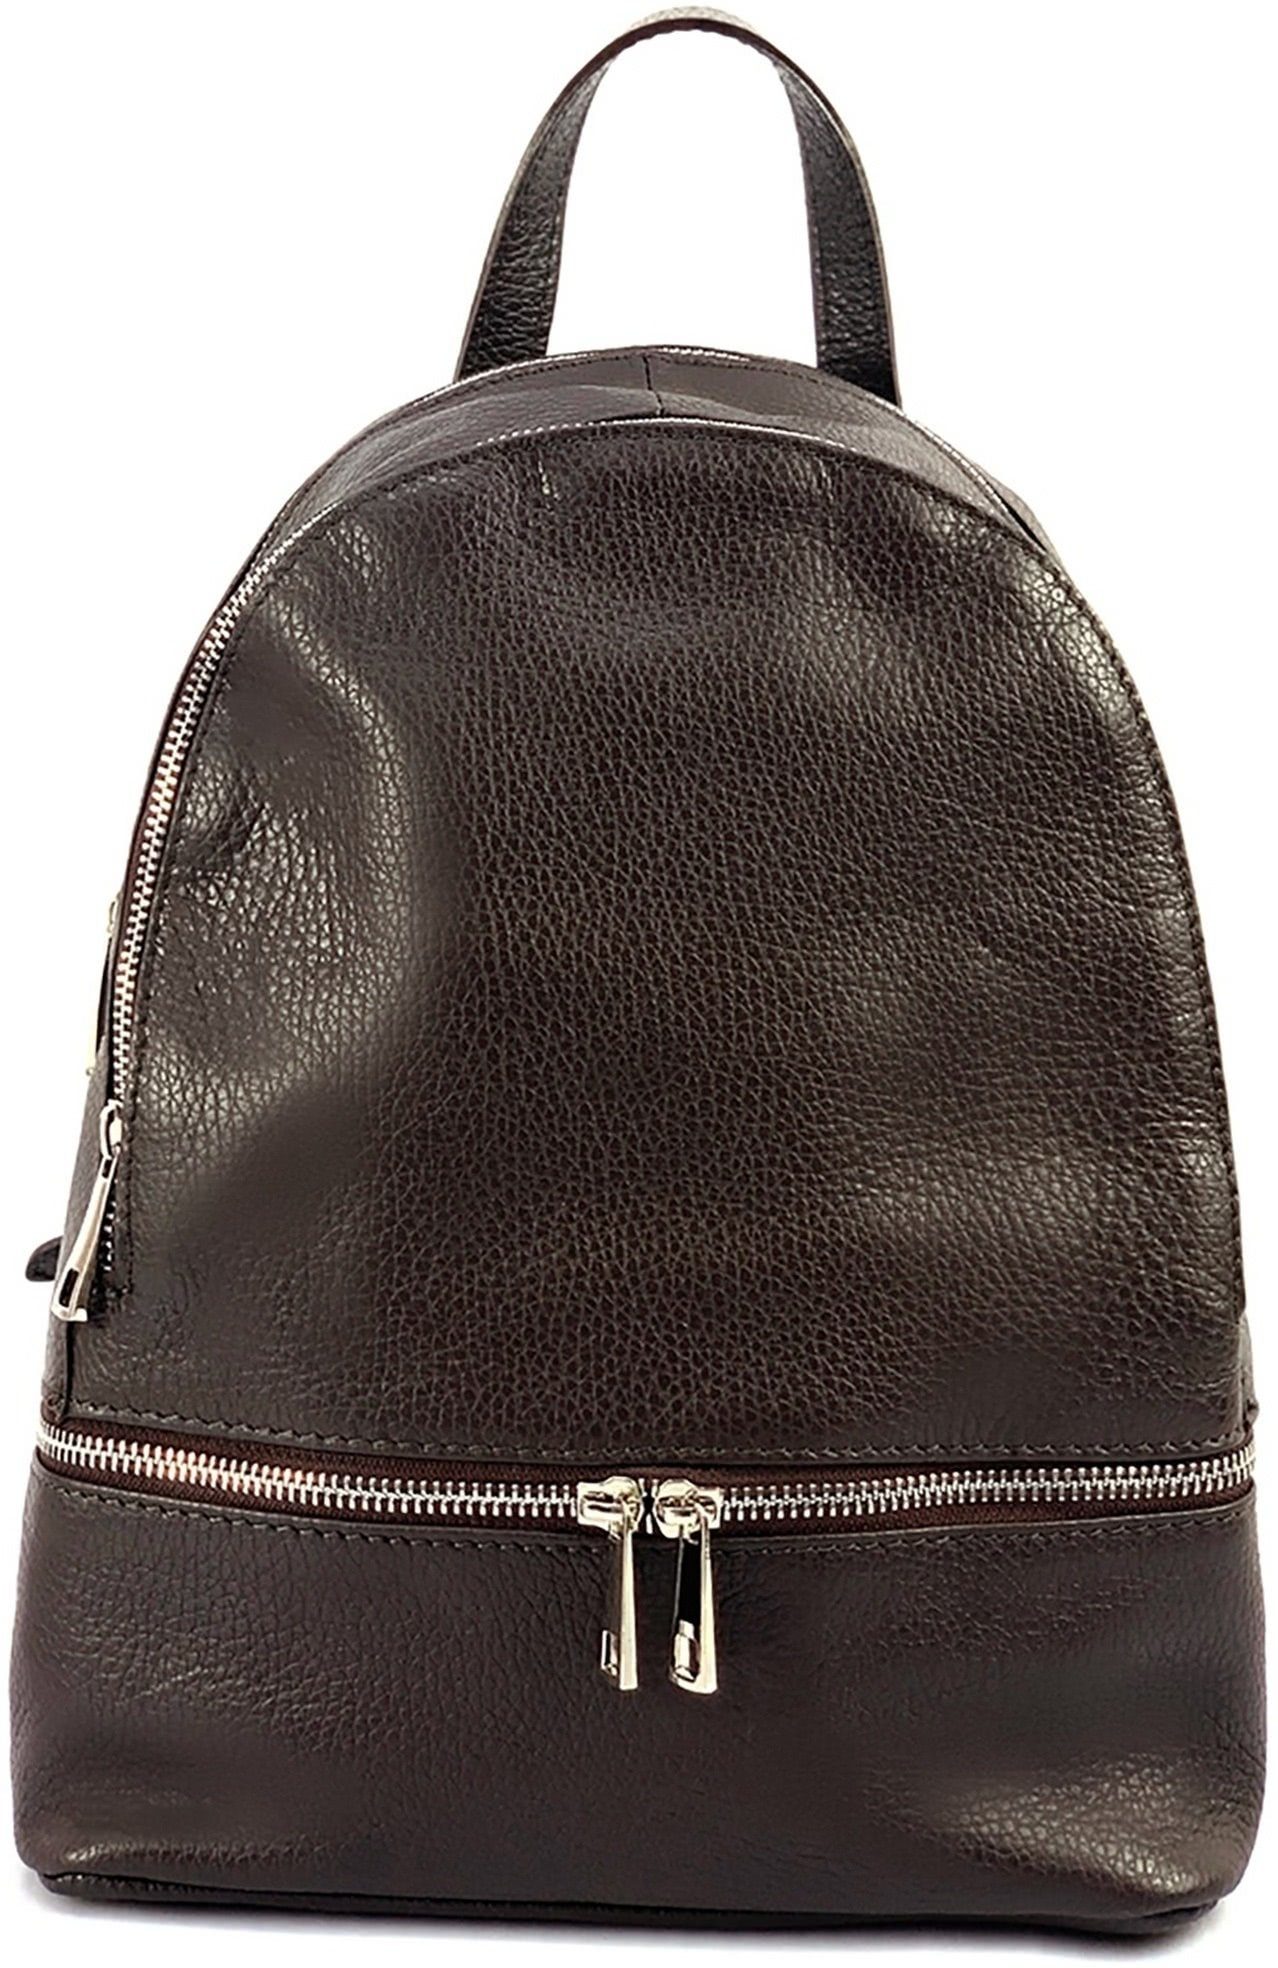 FLORENCE Cityrucksack Florence (Cityrucksack, Cityrucksack), Damen braun, Echtleder Echtleder Damen Tasche Italy Rucksack Made-In